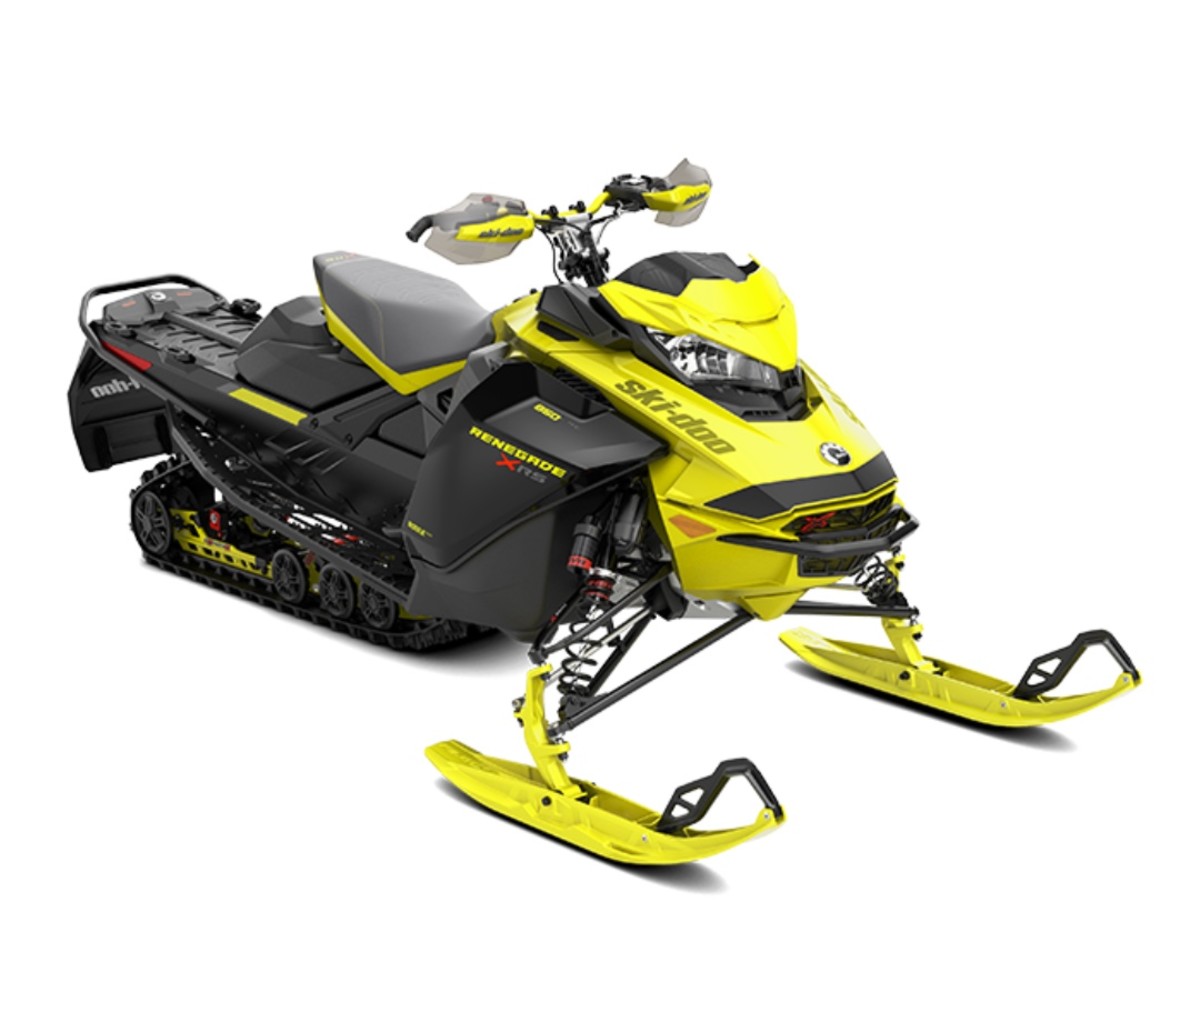 Choose one of these five new snowmobiles to venture far into snowy backcountry.